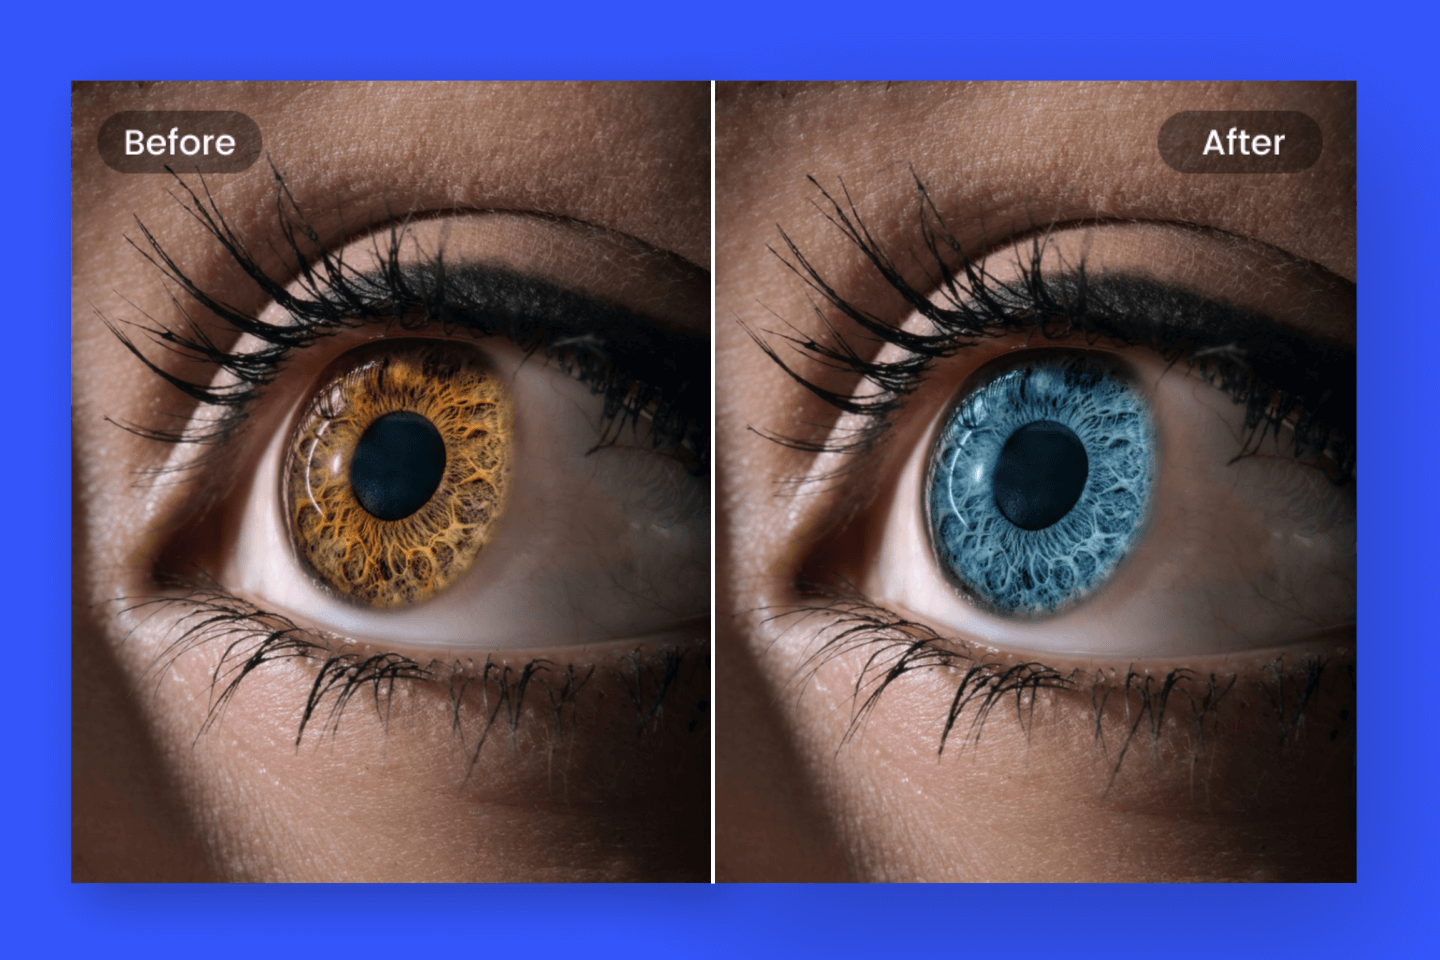 Change eye color from brown to blue